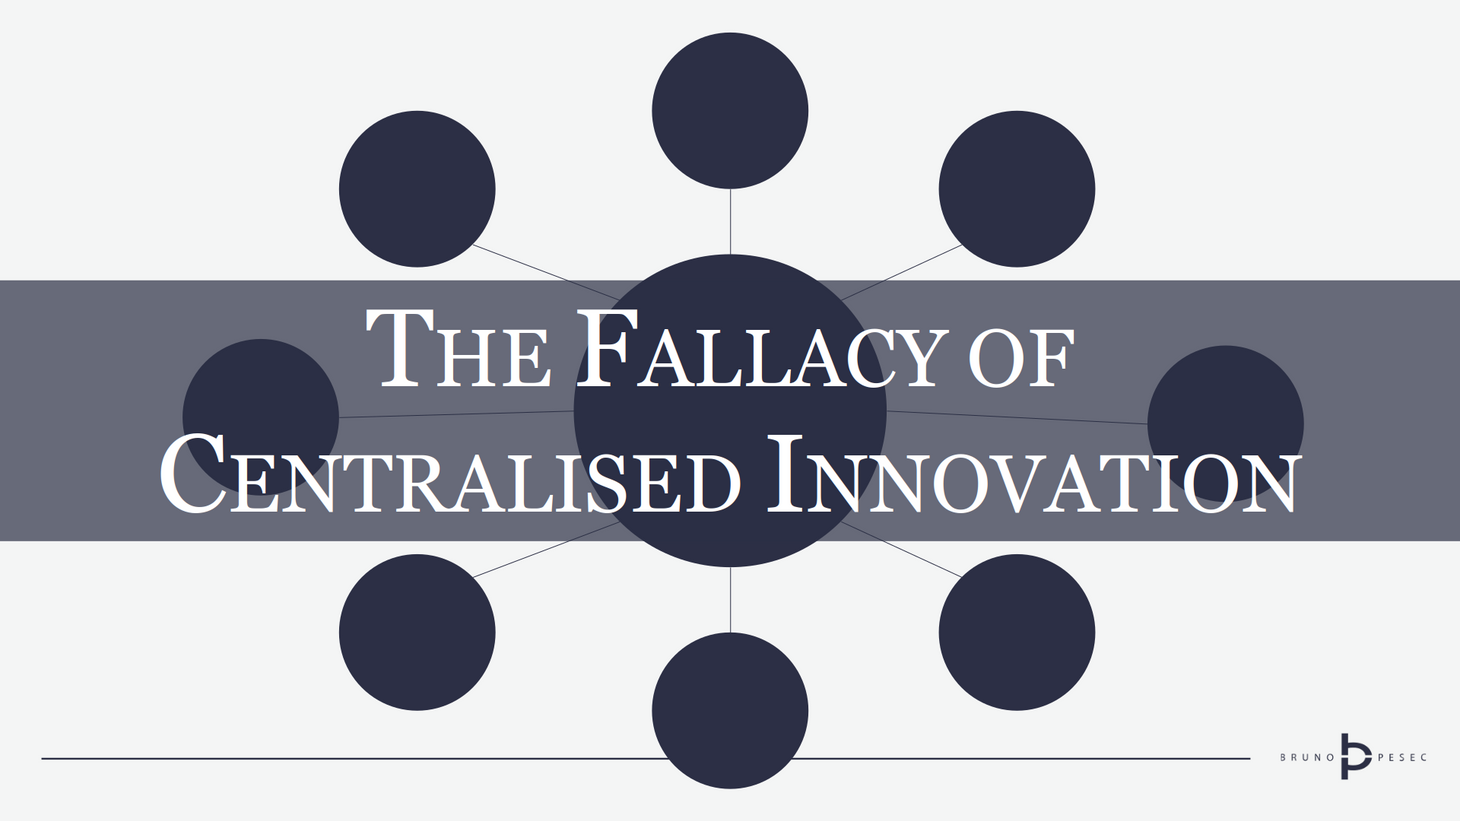 The fallacy of centralised innovation